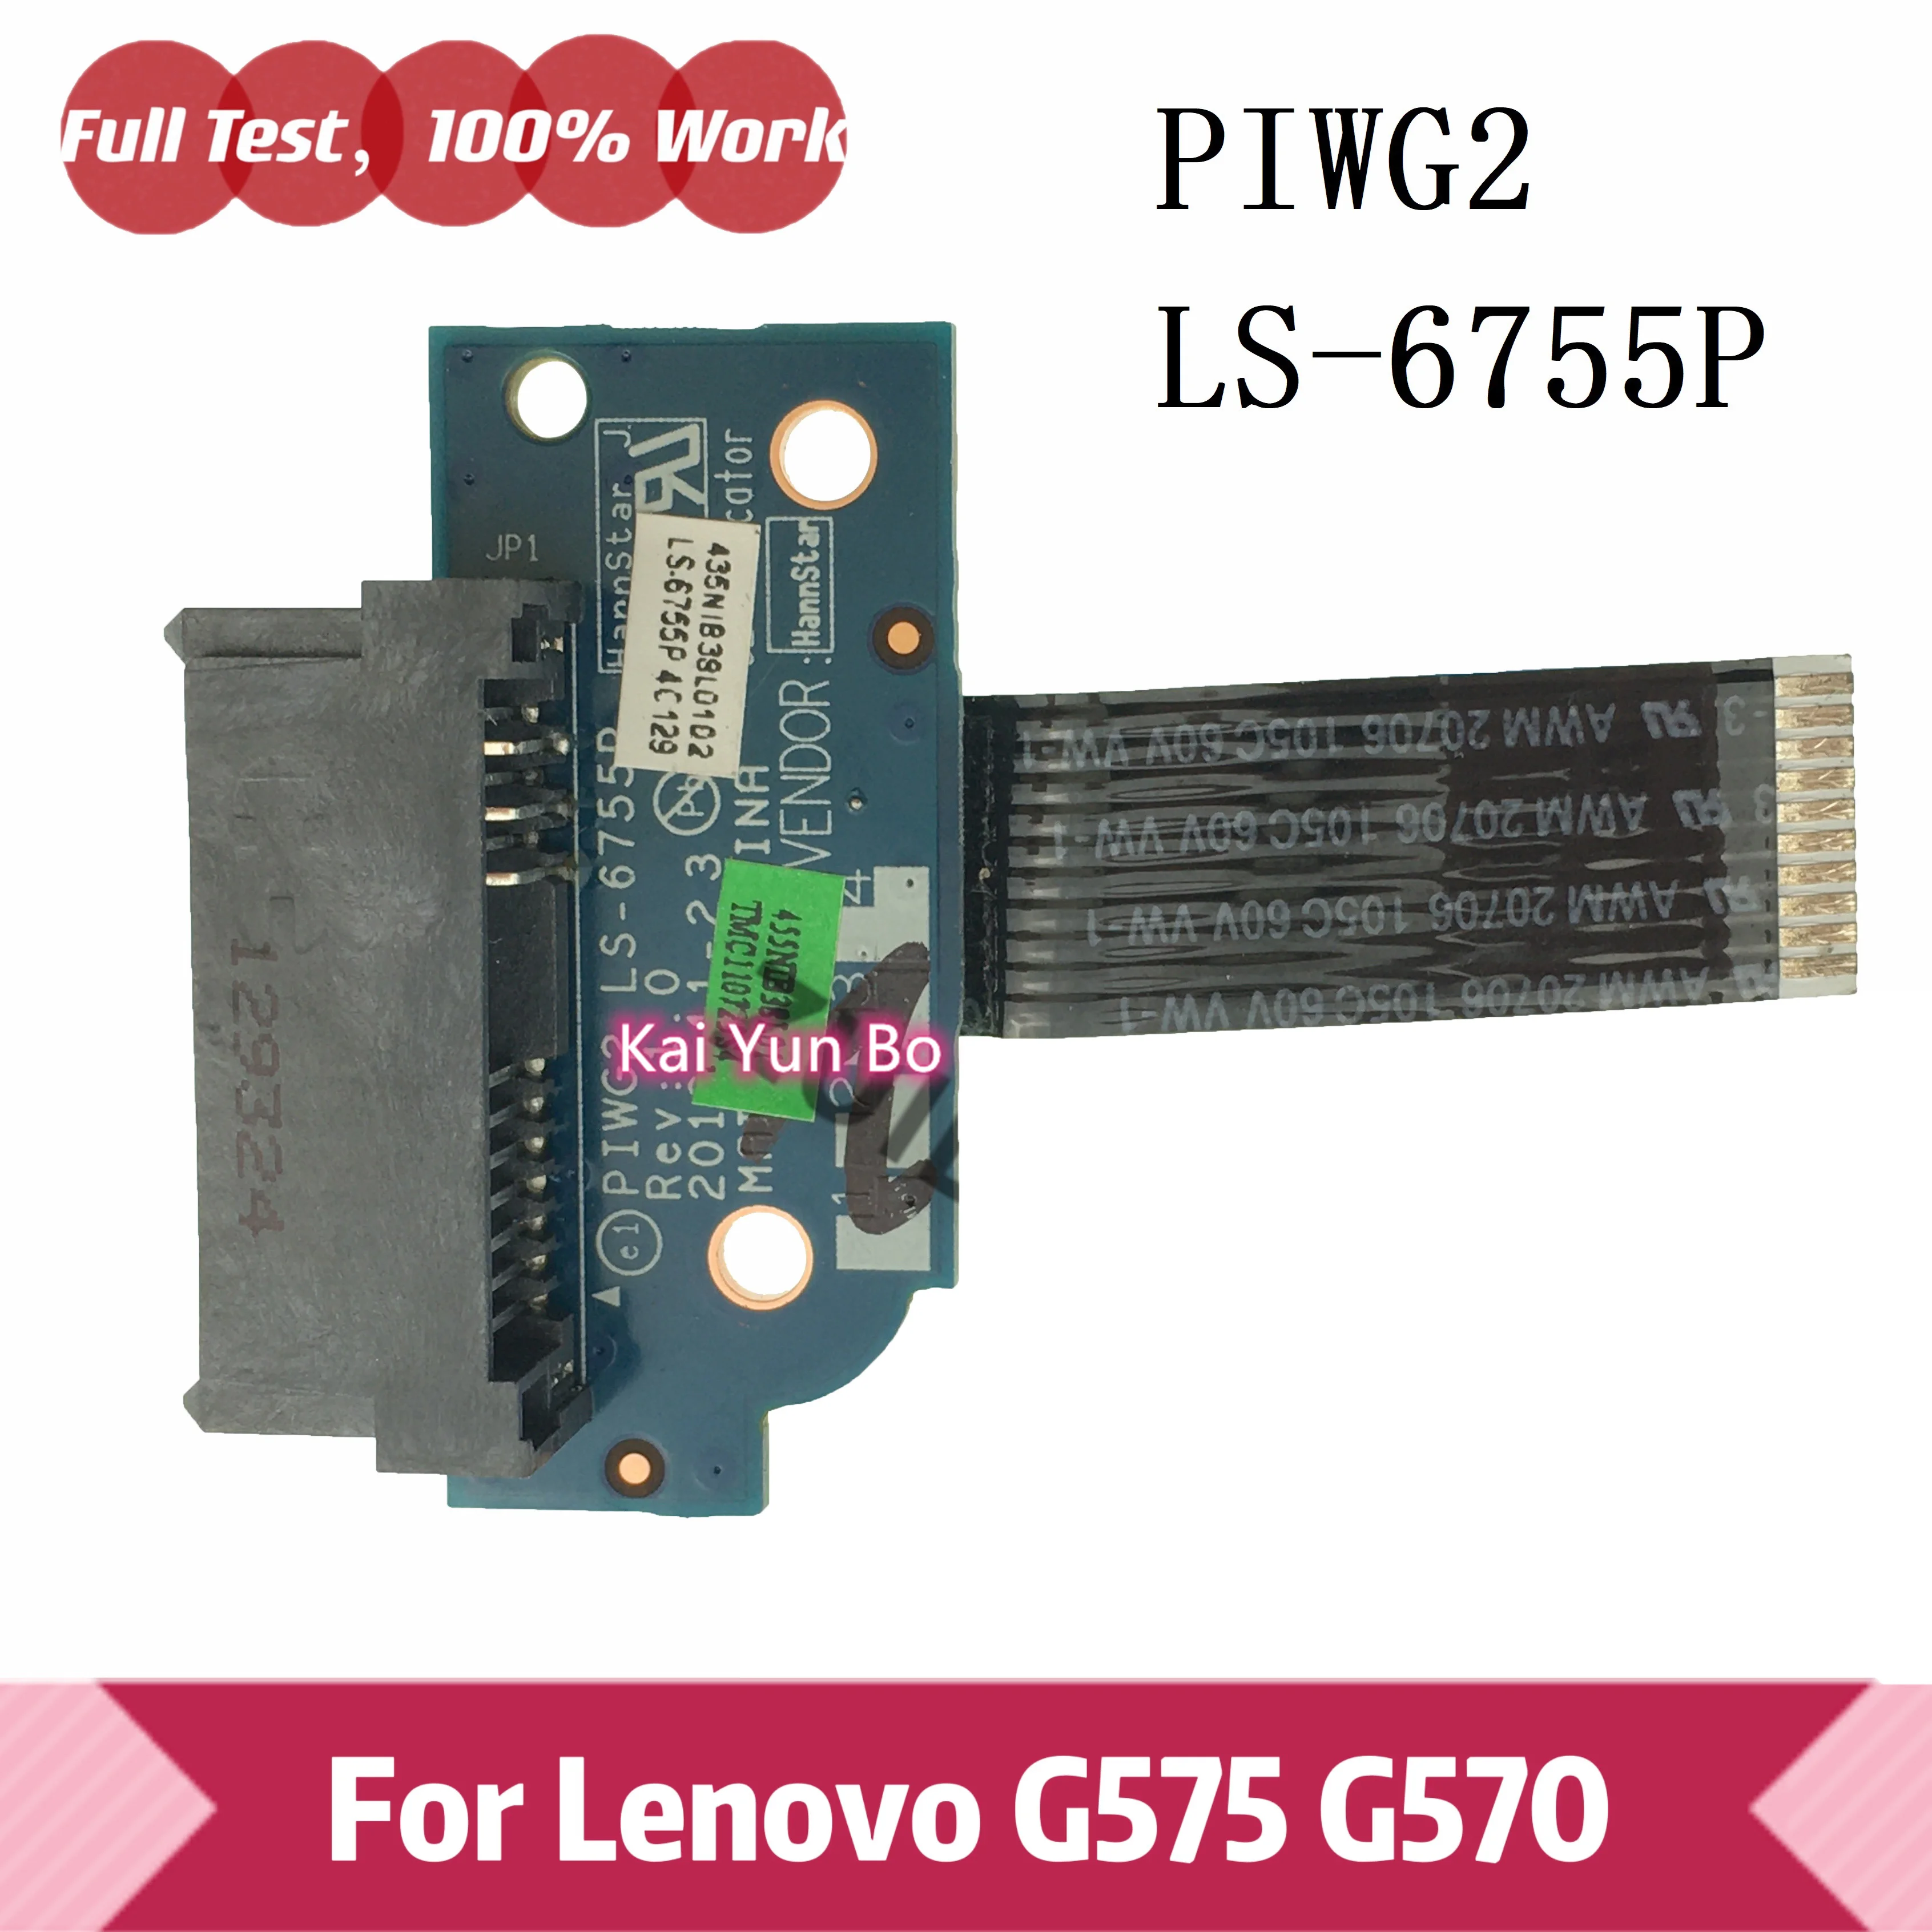 Laptop ODD Optical DVD Drive Connector Board w/ Cable For Lenovo G575 G570 PIWG2 LS-6755P 100% Test ok